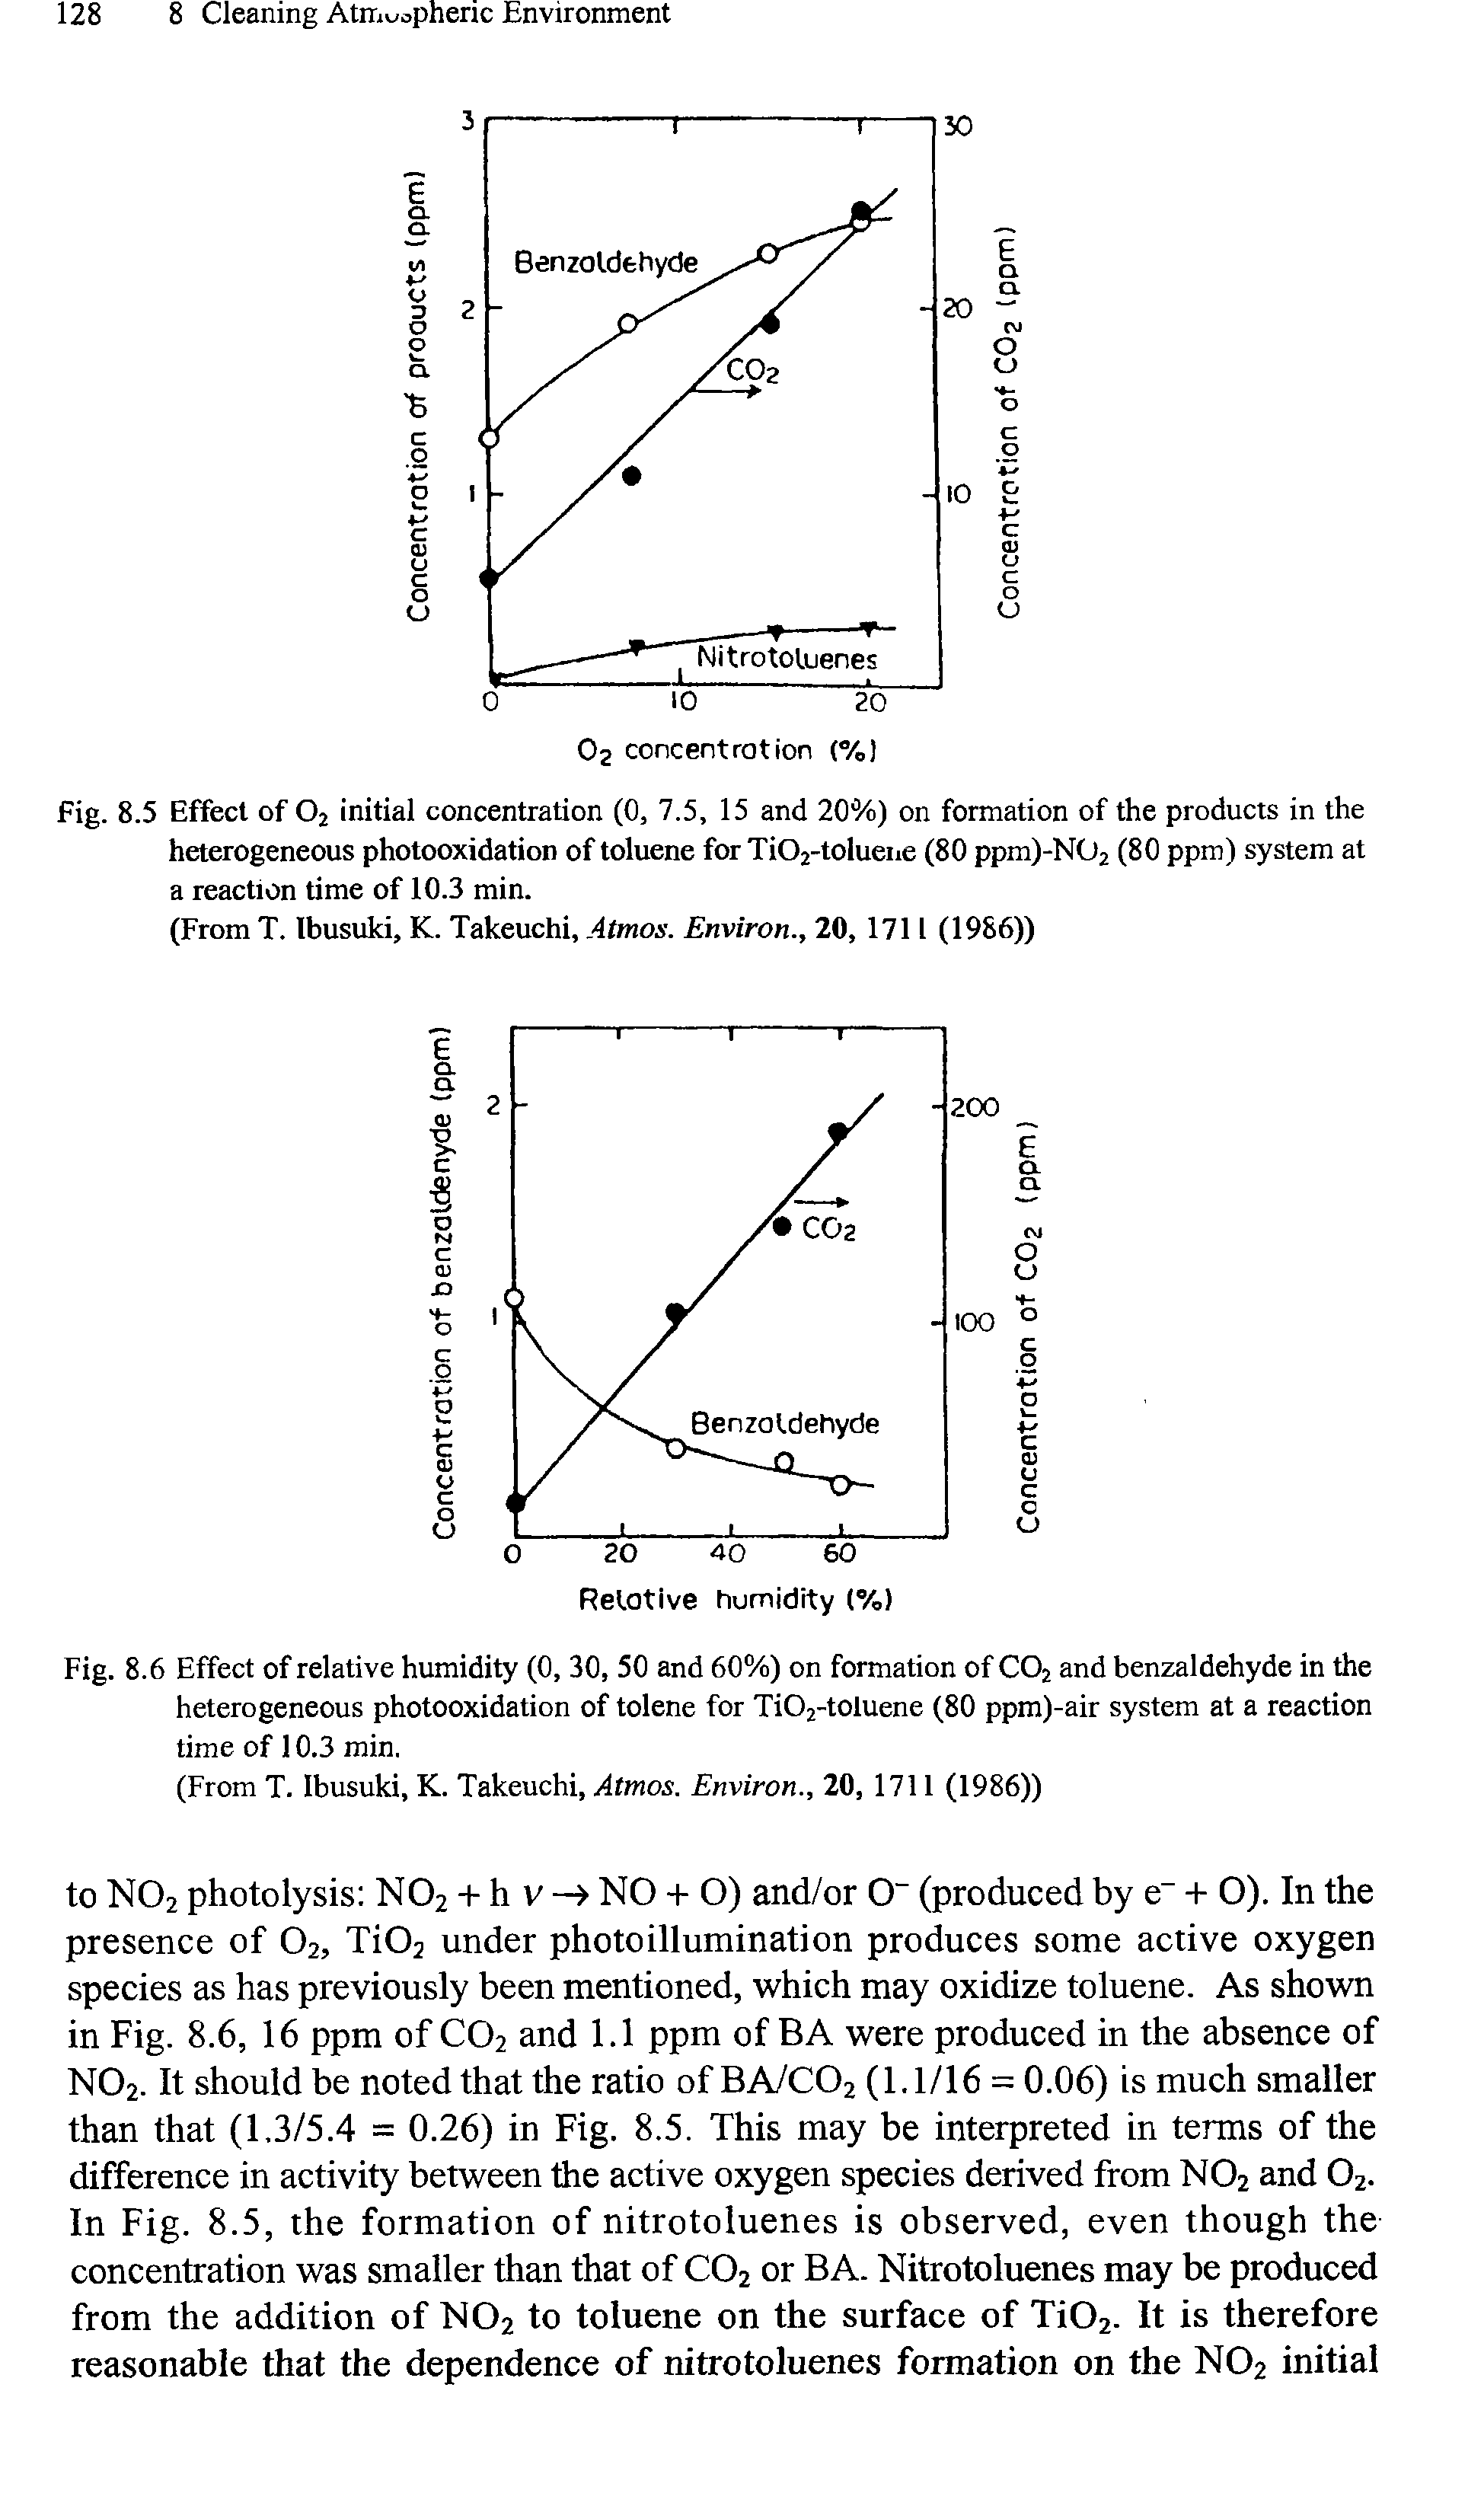 Fig. 8.5 Effect of 02 initial concentration (0, 7.5, 15 and 20%) on formation of the products in the heterogeneous photooxidation of toluene for TiOj-toluene (80 ppm)-NOz (80 ppm) system at a reaction time of 10.3 min.